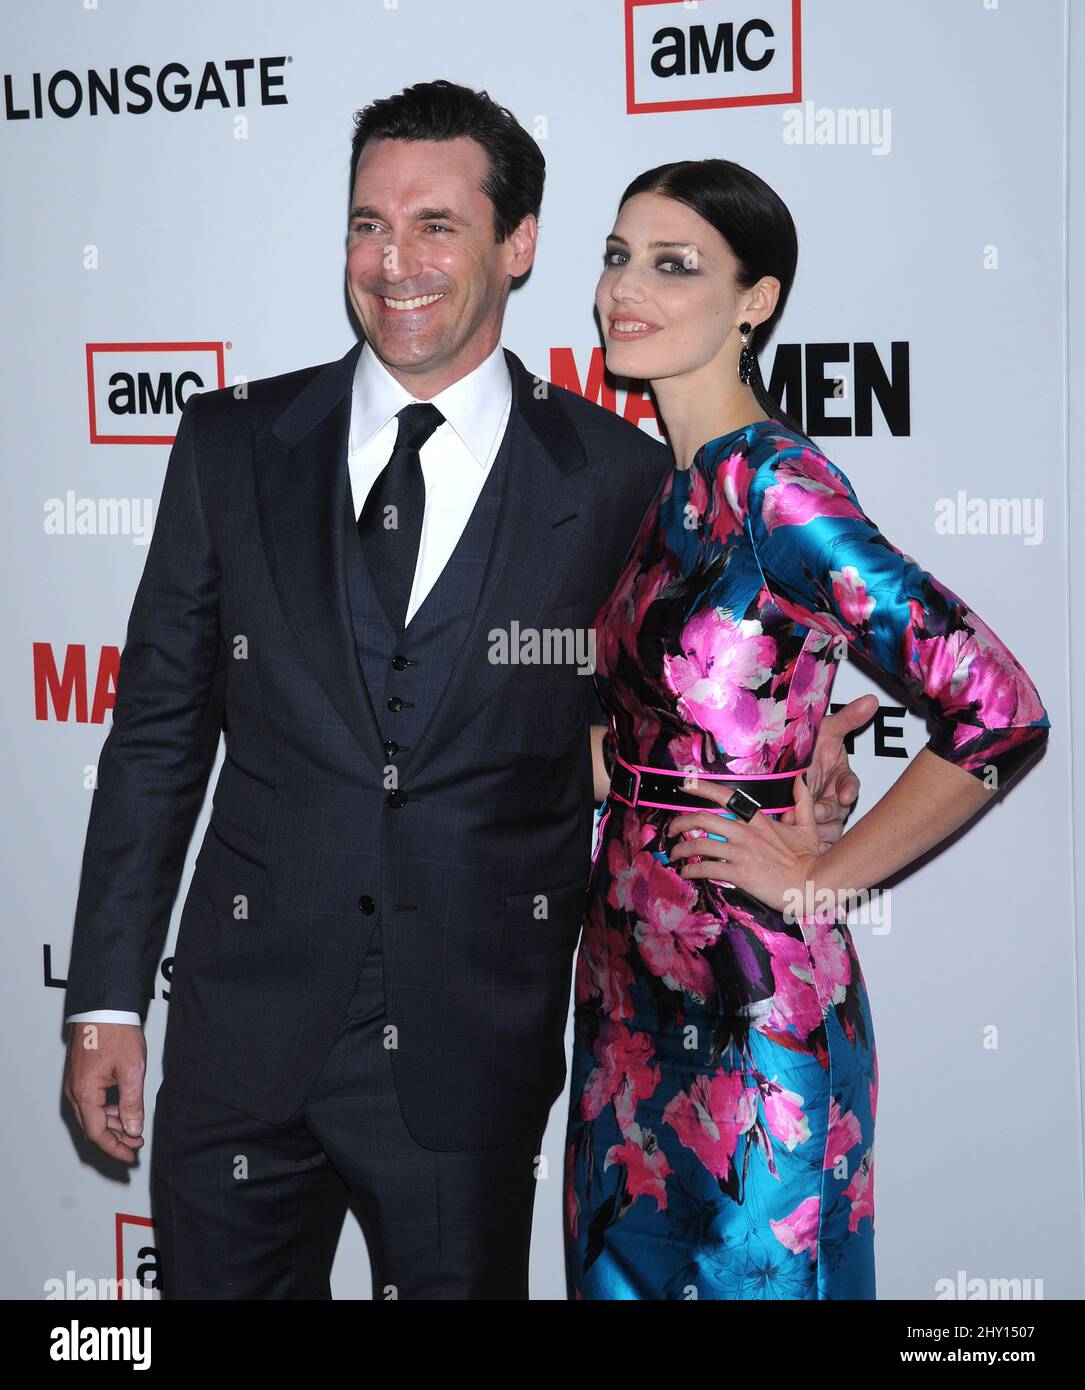 Jon Hamm and Jessica Pare attending a photocall for the premiere of season six of 'Mad Men,' held at the Directors Guild of American Theatre in Los Angeles, California. Stock Photo